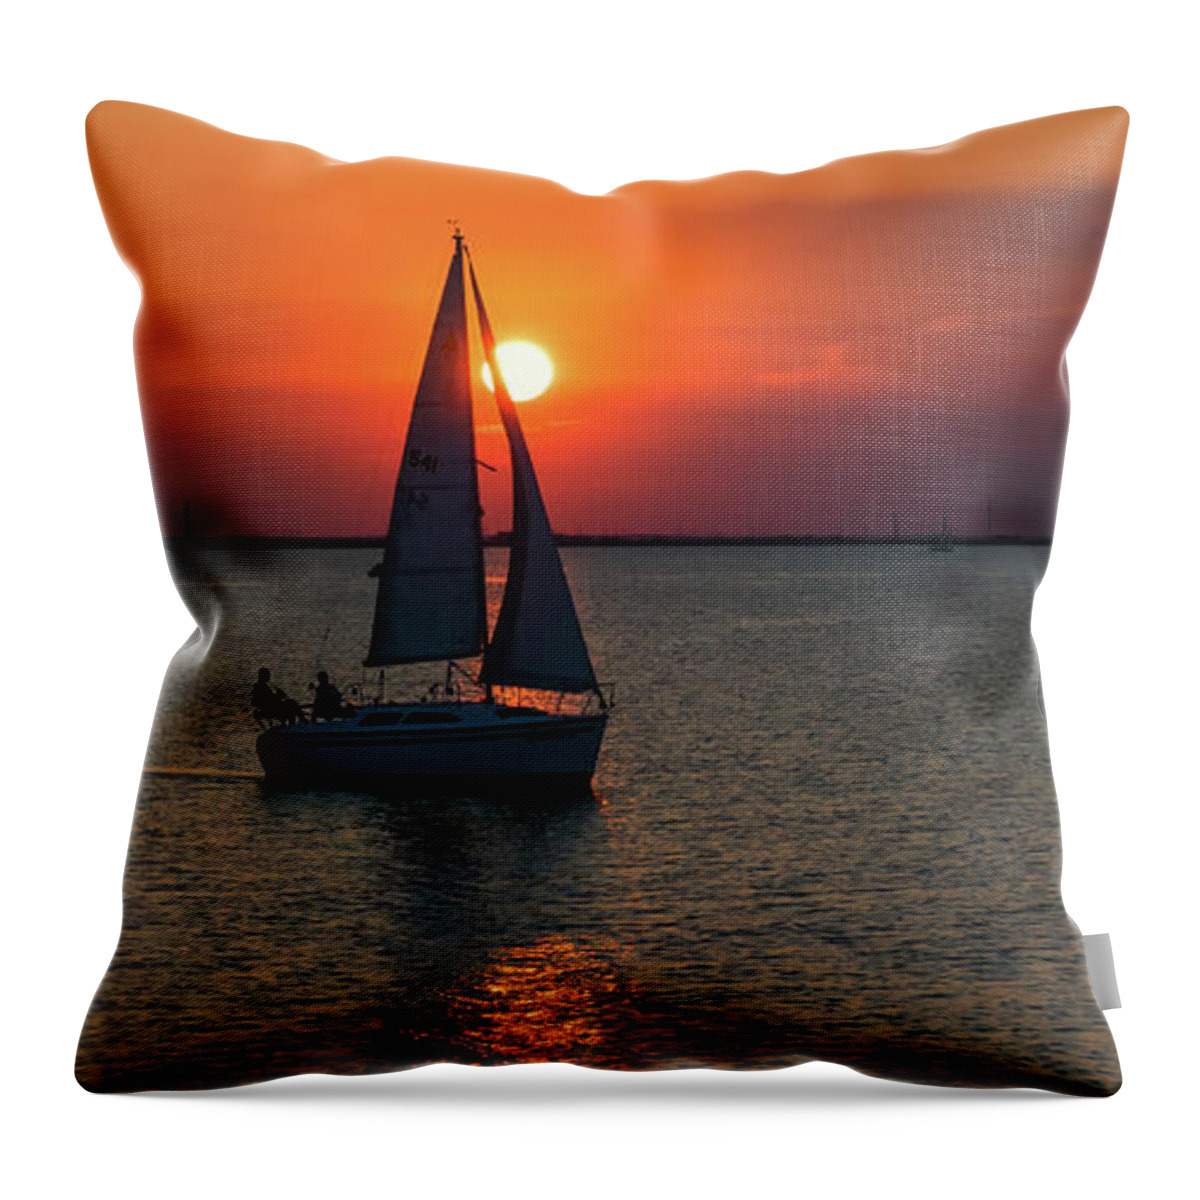 Sunset Throw Pillow featuring the photograph Glimpse by Joe Ownbey